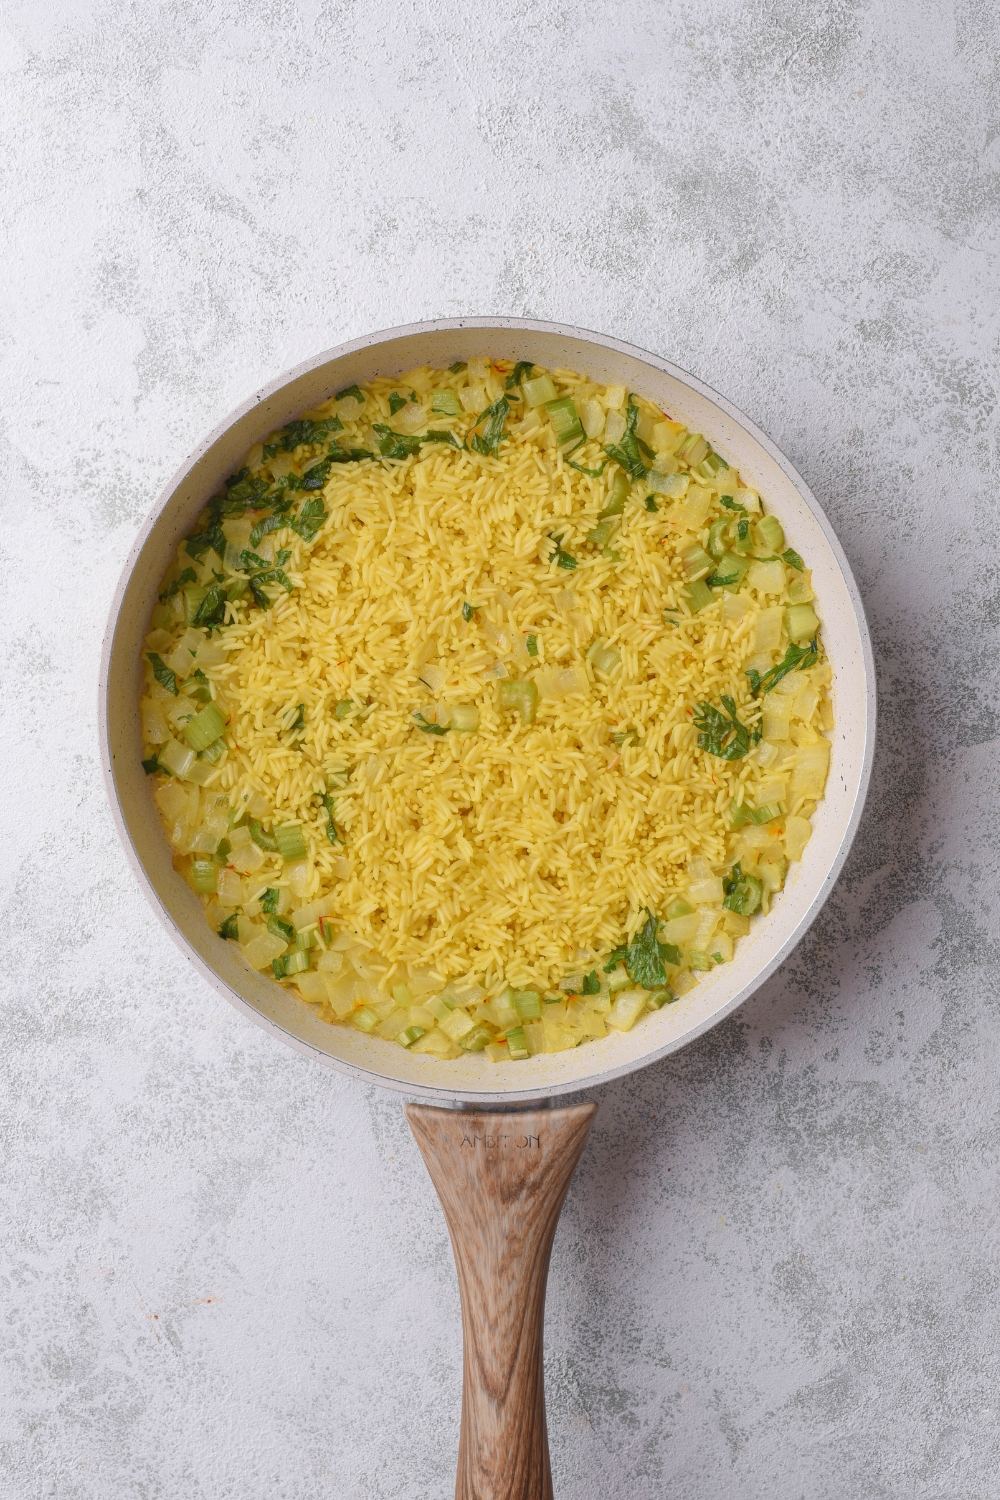 A skillet filled with yellow rice, fresh parsley, diced celery, and diced onion.